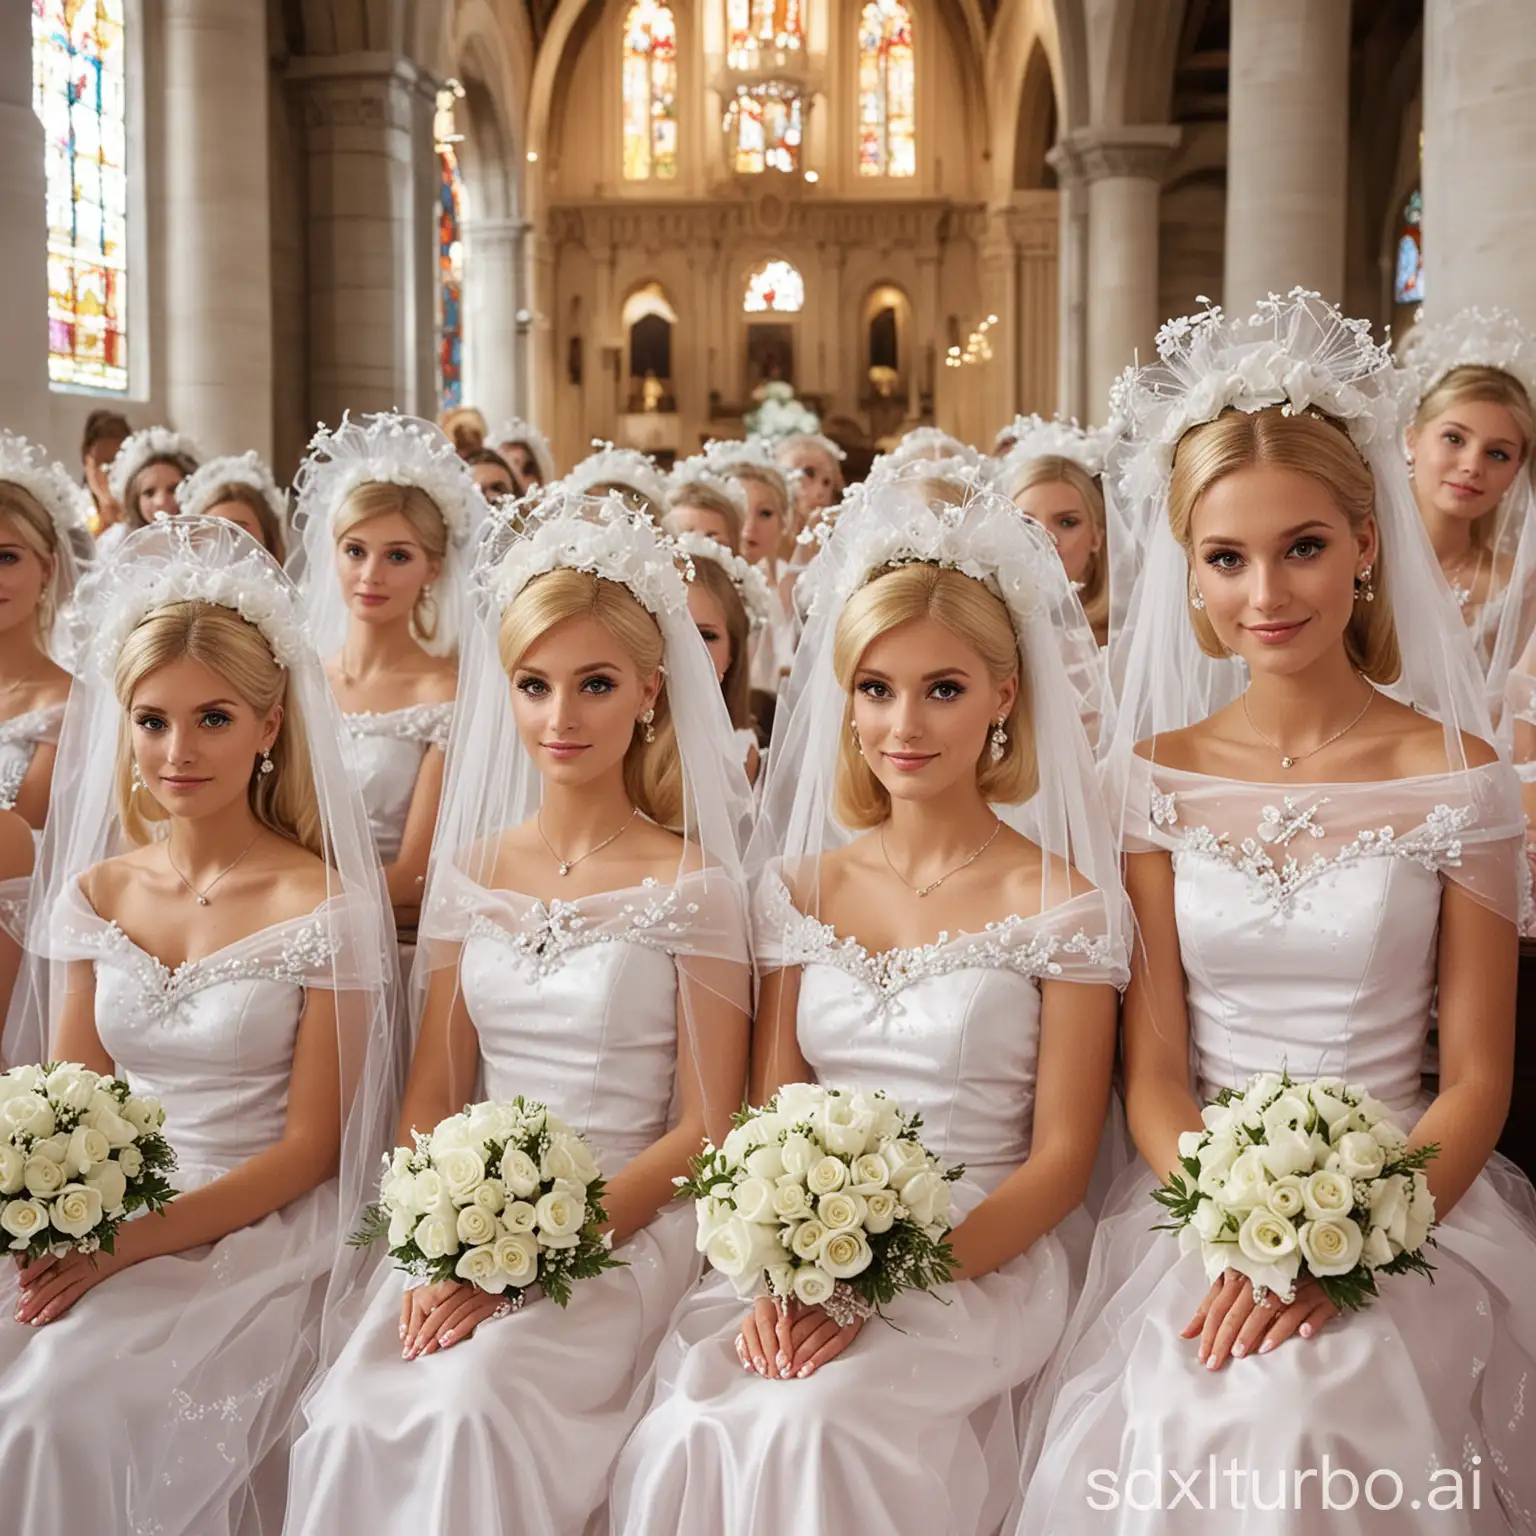 Crowd of Val Marchiori and her clones dressed as Barbie brides in veil and garland with white gloves and bouquet of flowers gathered sitting in the church